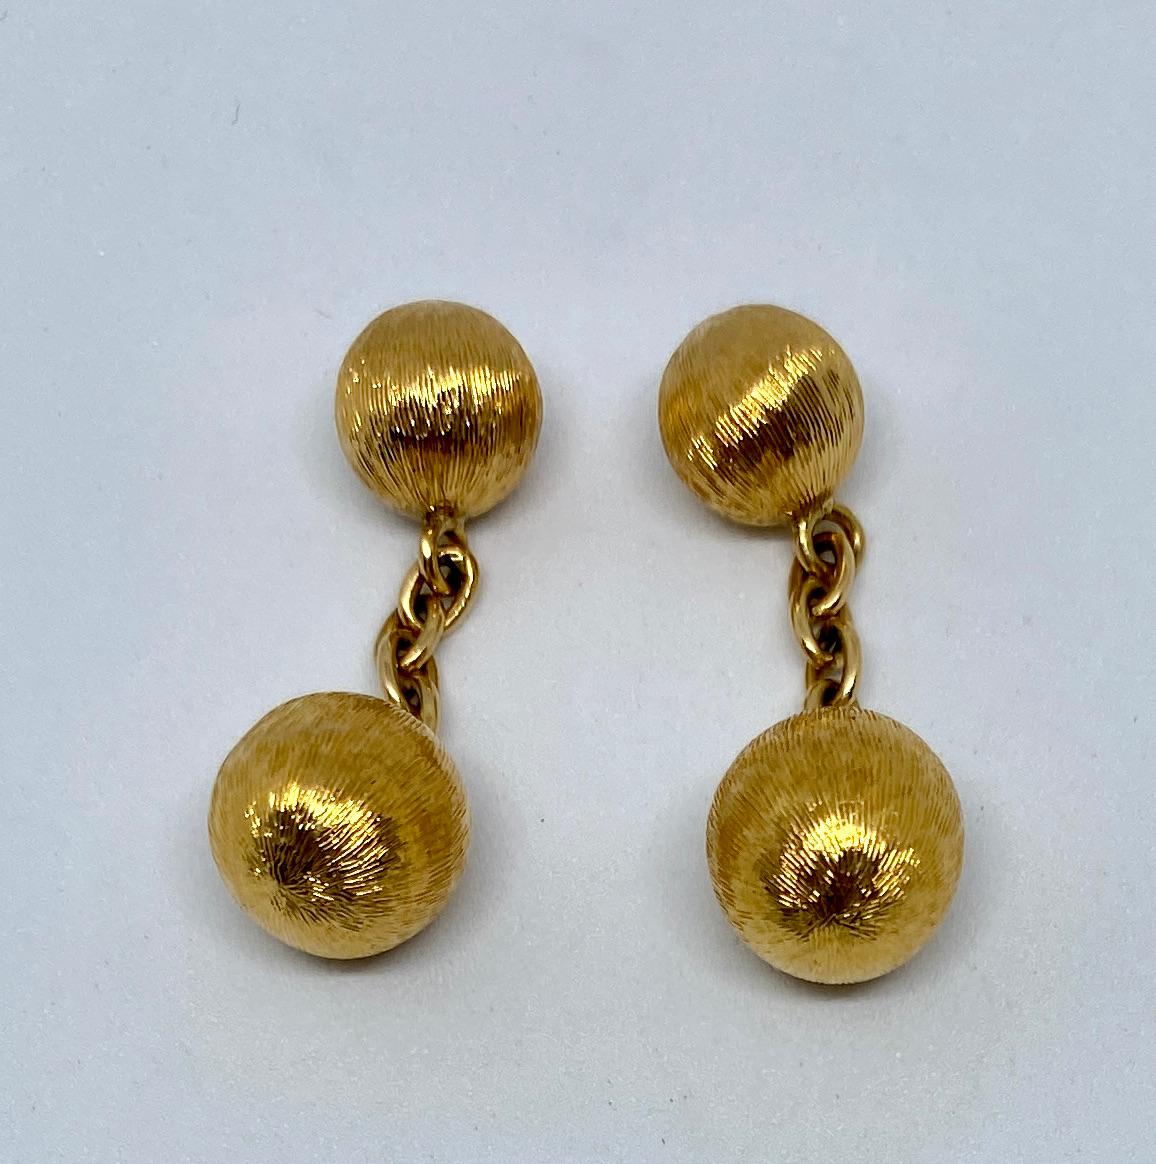 Fantastic, simple, tasteful cufflinks in 18K yellow gold with a Florentine finish that catches the light beautifully.

The larger spheres measure 10.5 mm in diameter; the smaller ones measure 8.7 mm. They're joined by 18K yellow gold chains.

These